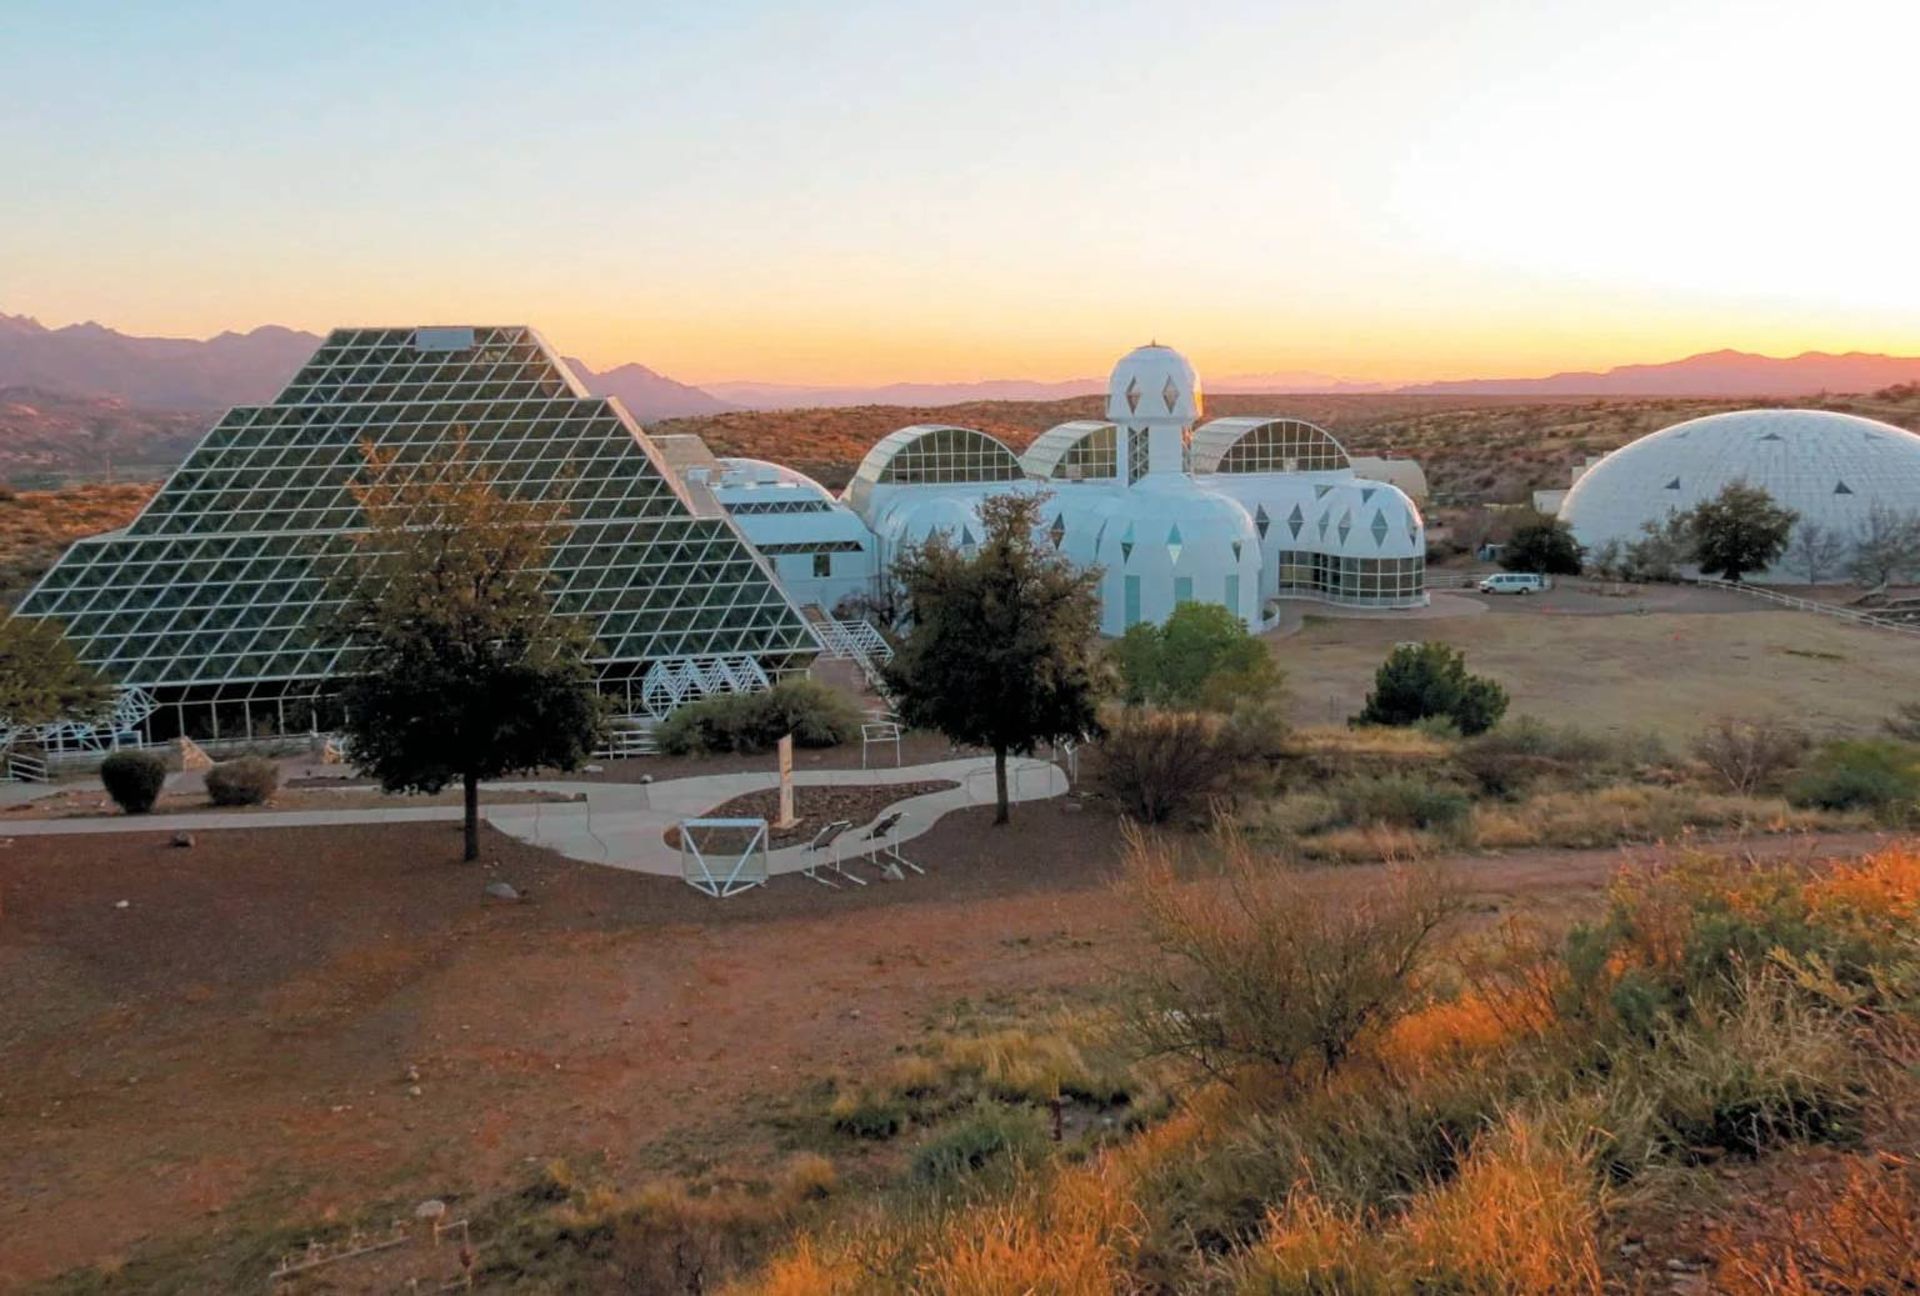 Biosphere Research Center 2